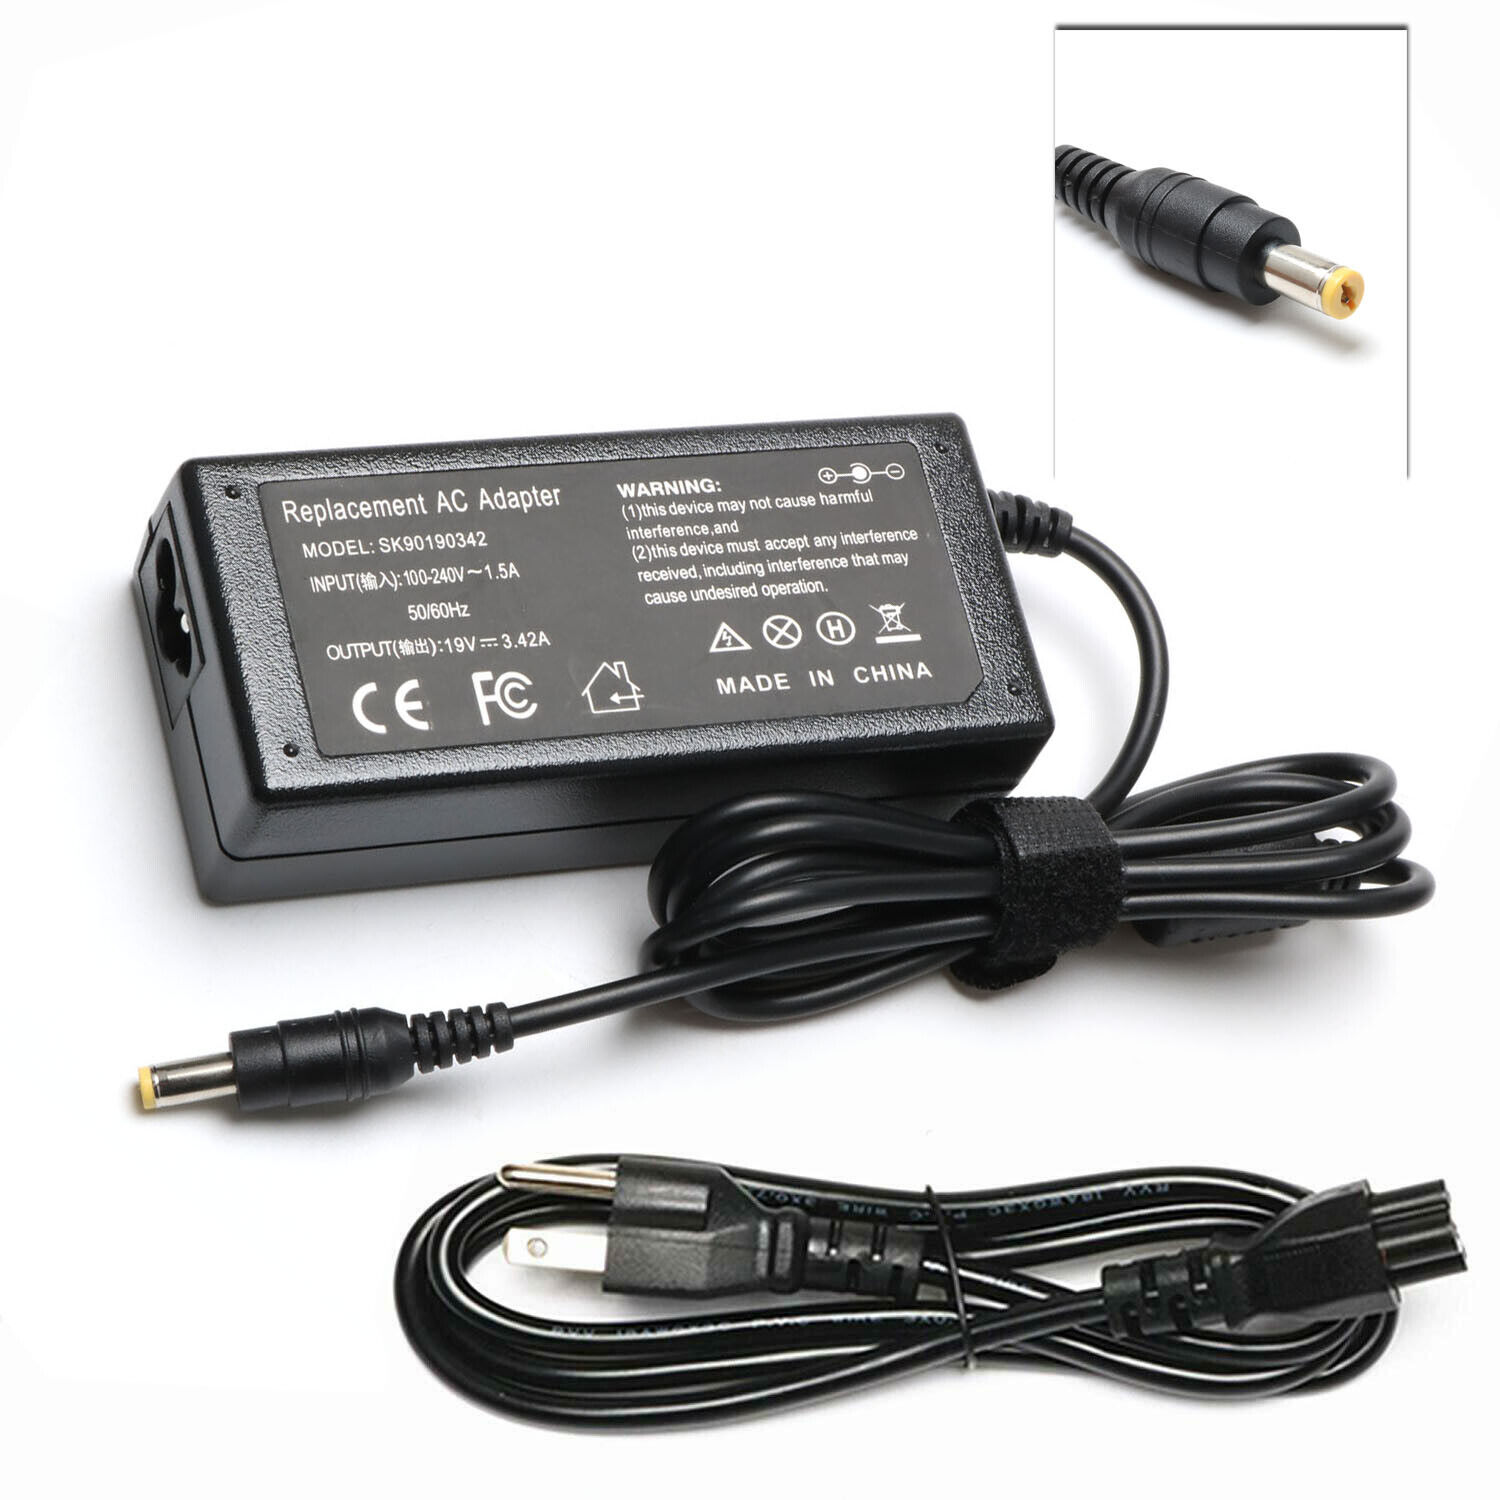 AC Adapter For Acer G257HU G276HL G277HL GN246HL LED Monitor Power Charger Cord